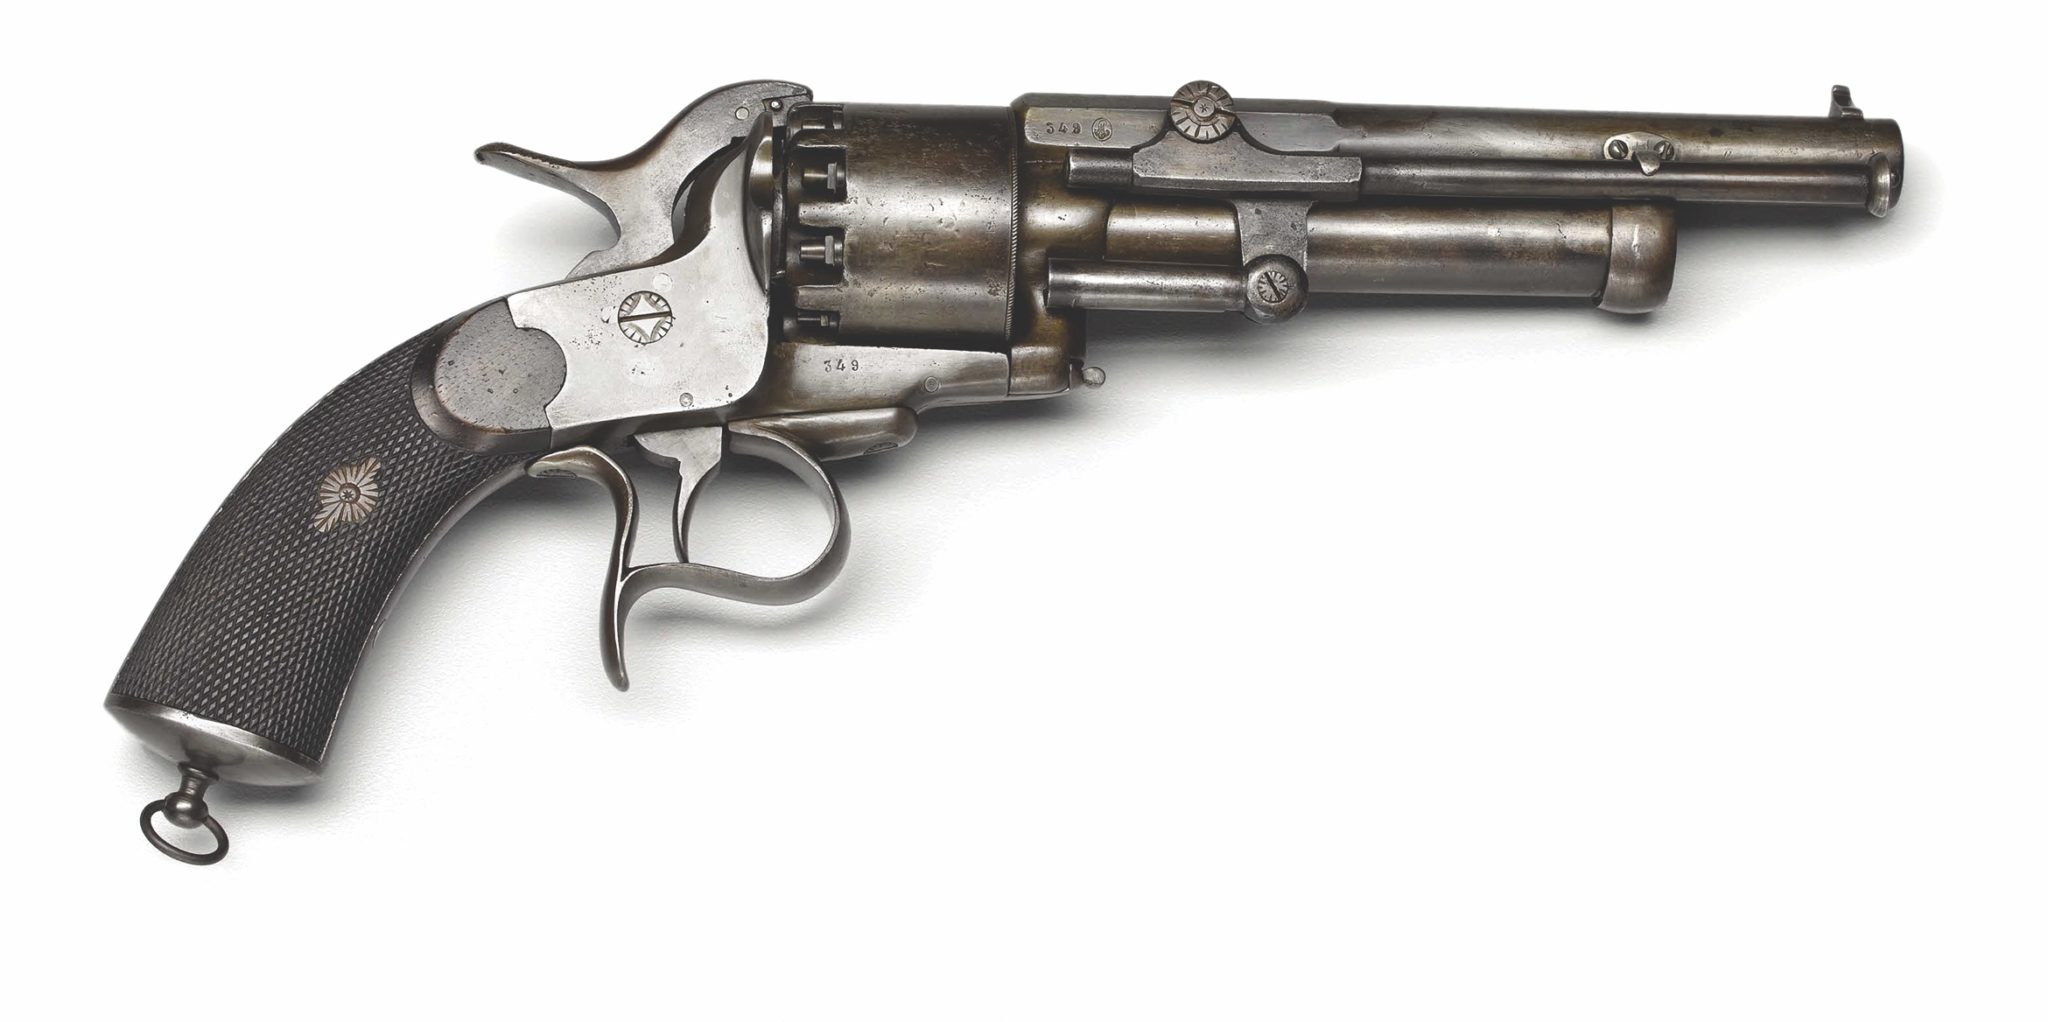 LeMat Revolver: The Innovative, Single-Handed, Close-Quarters Weapon